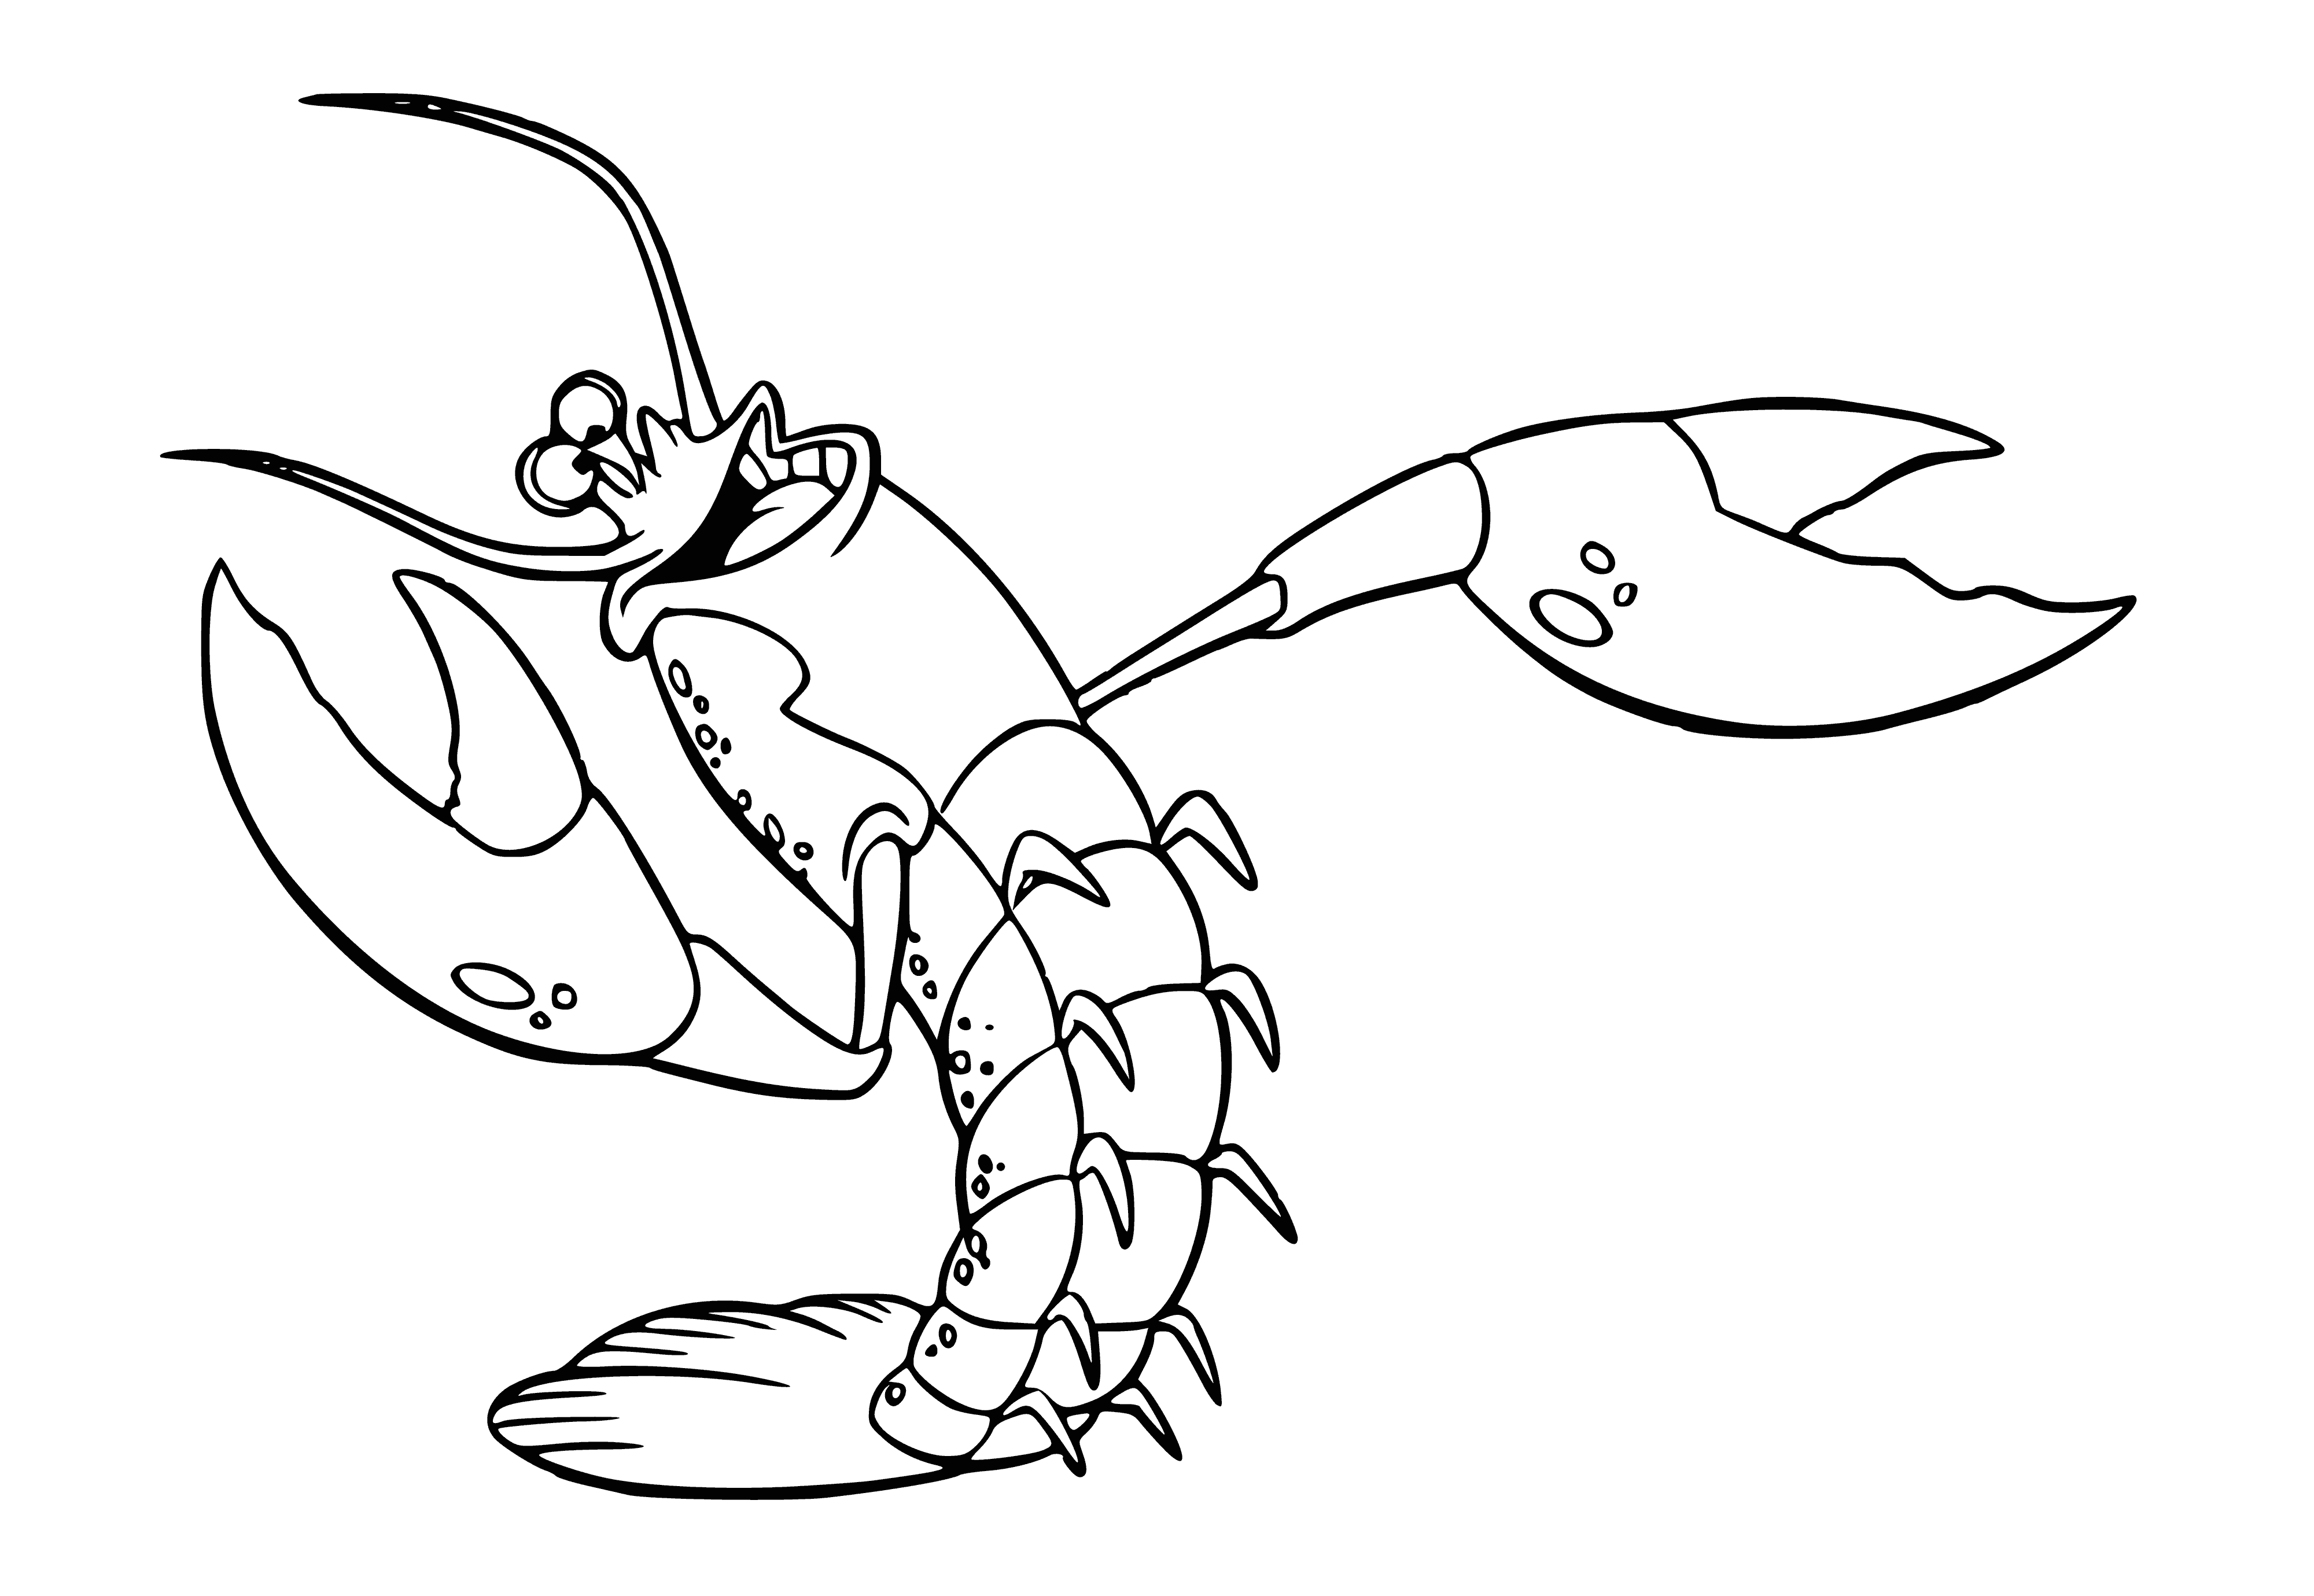 coloring page: Mermaid shrimp with blue tail, purple top & blonde curls sings into mic with pink lips & white teeth.